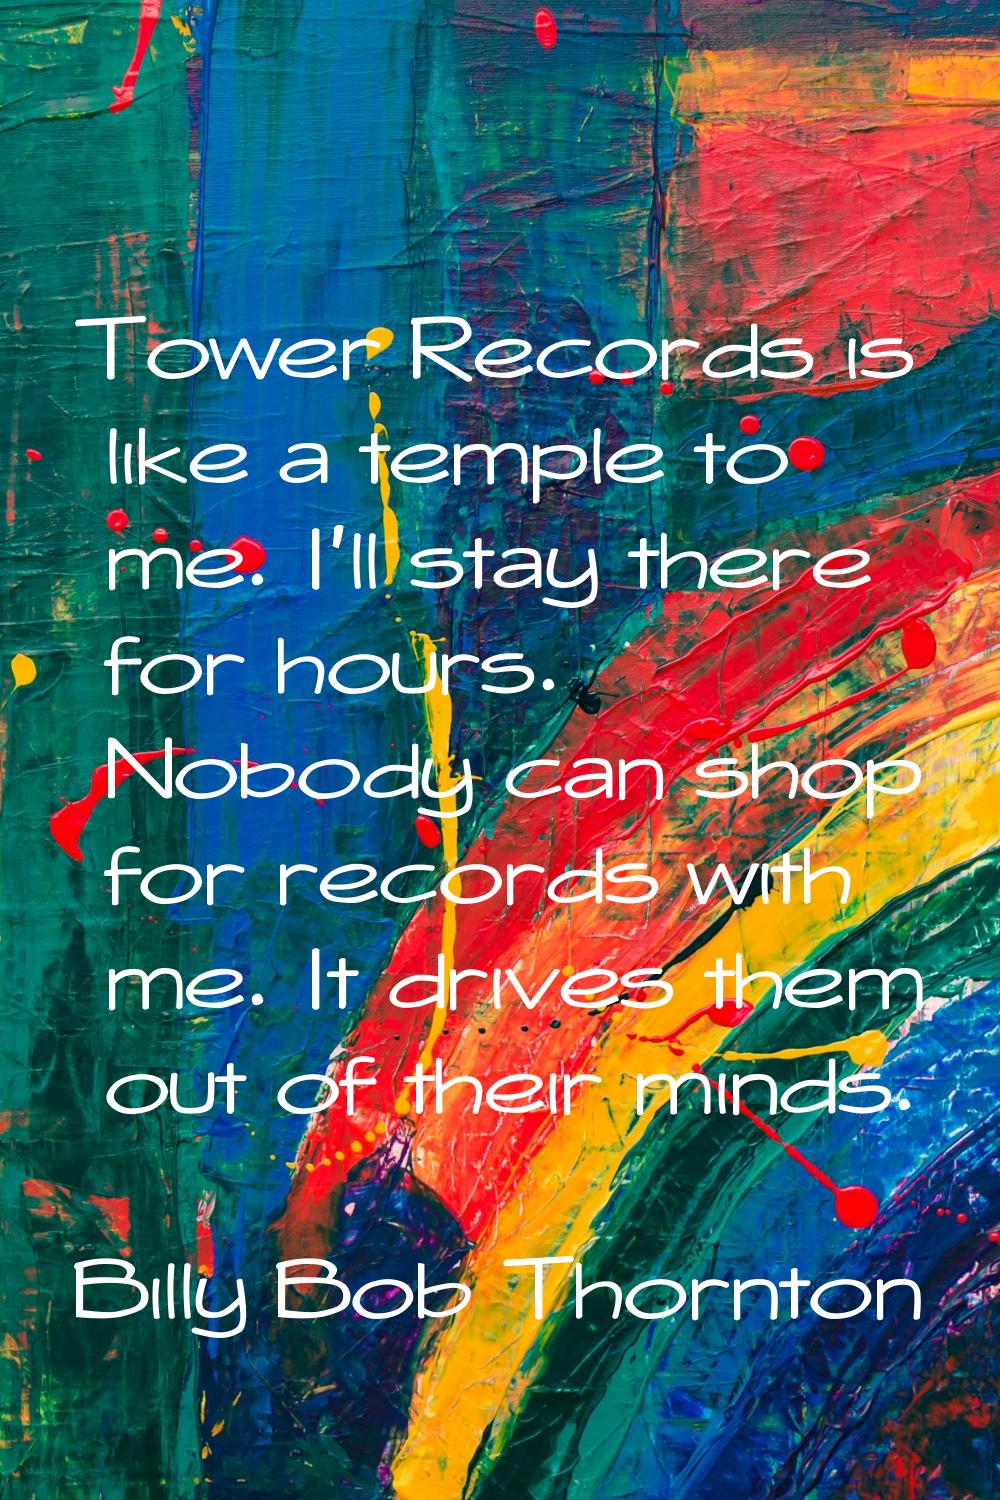 Tower Records is like a temple to me. I'll stay there for hours. Nobody can shop for records with m